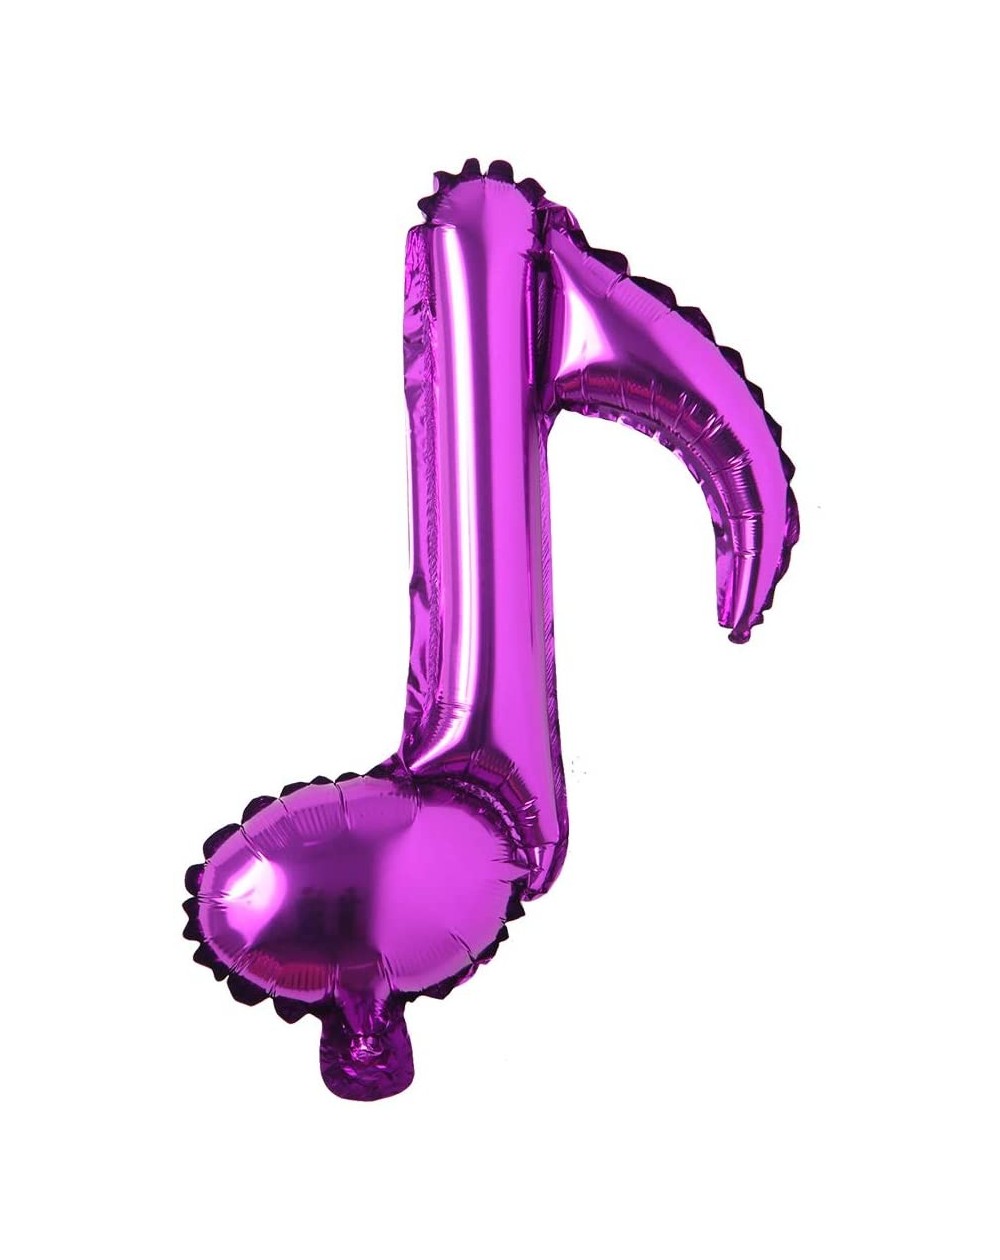 Balloons Musical Notes foil Mylar Balloons Wedding Birthday Party Supplies Inflatable Wedding Decorations Supplies Helium Bal...